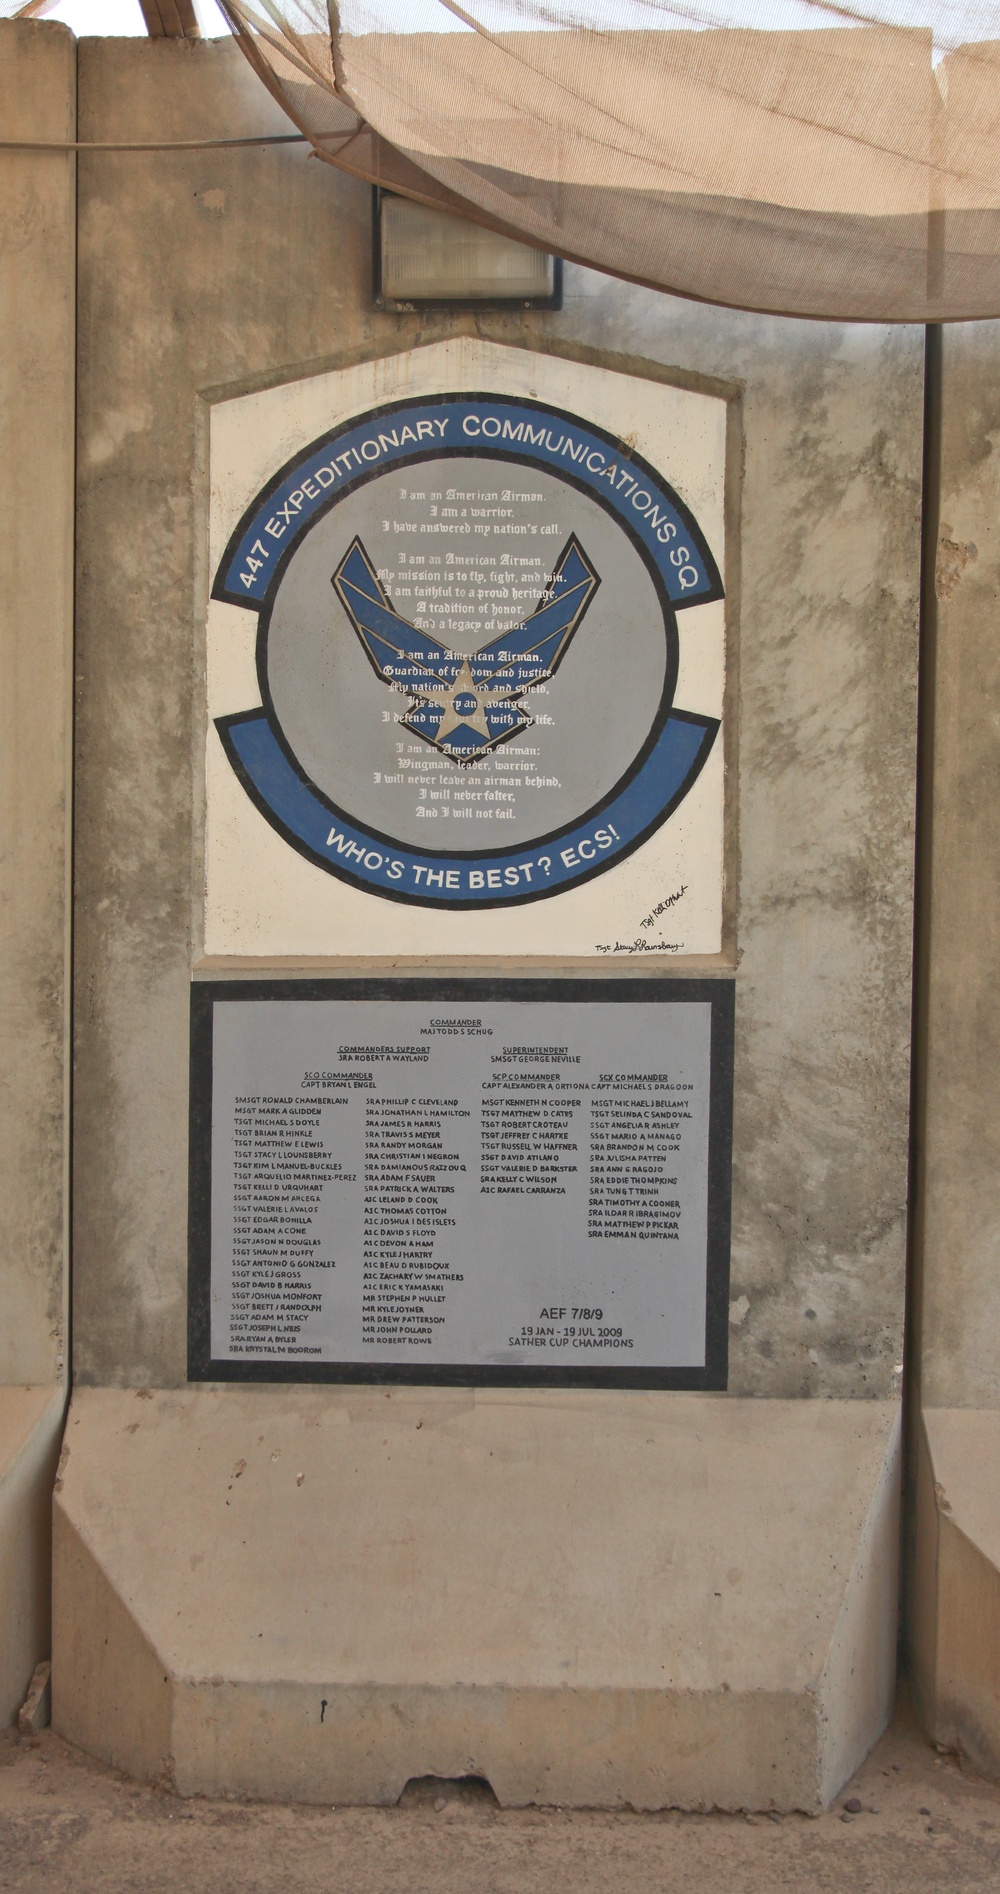 T-wall art on Sather Air Base